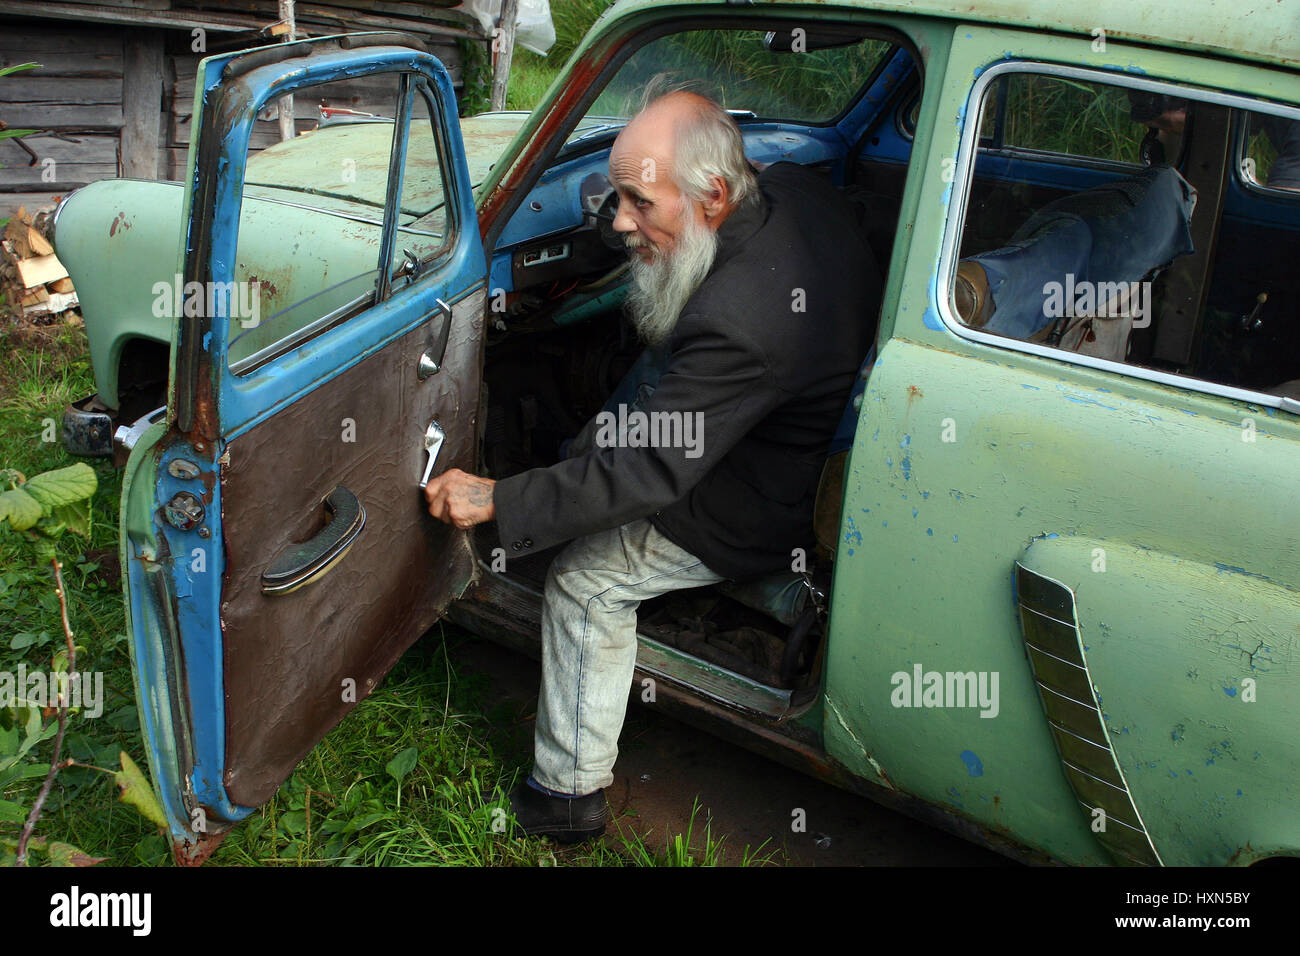 Leningrad area of St. Petersburg, Russia - August 23, 2006: Valentin Stepanovich Shramko born in 1938, Elderly man sits in an old Soviet-made car, Mos Stock Photo